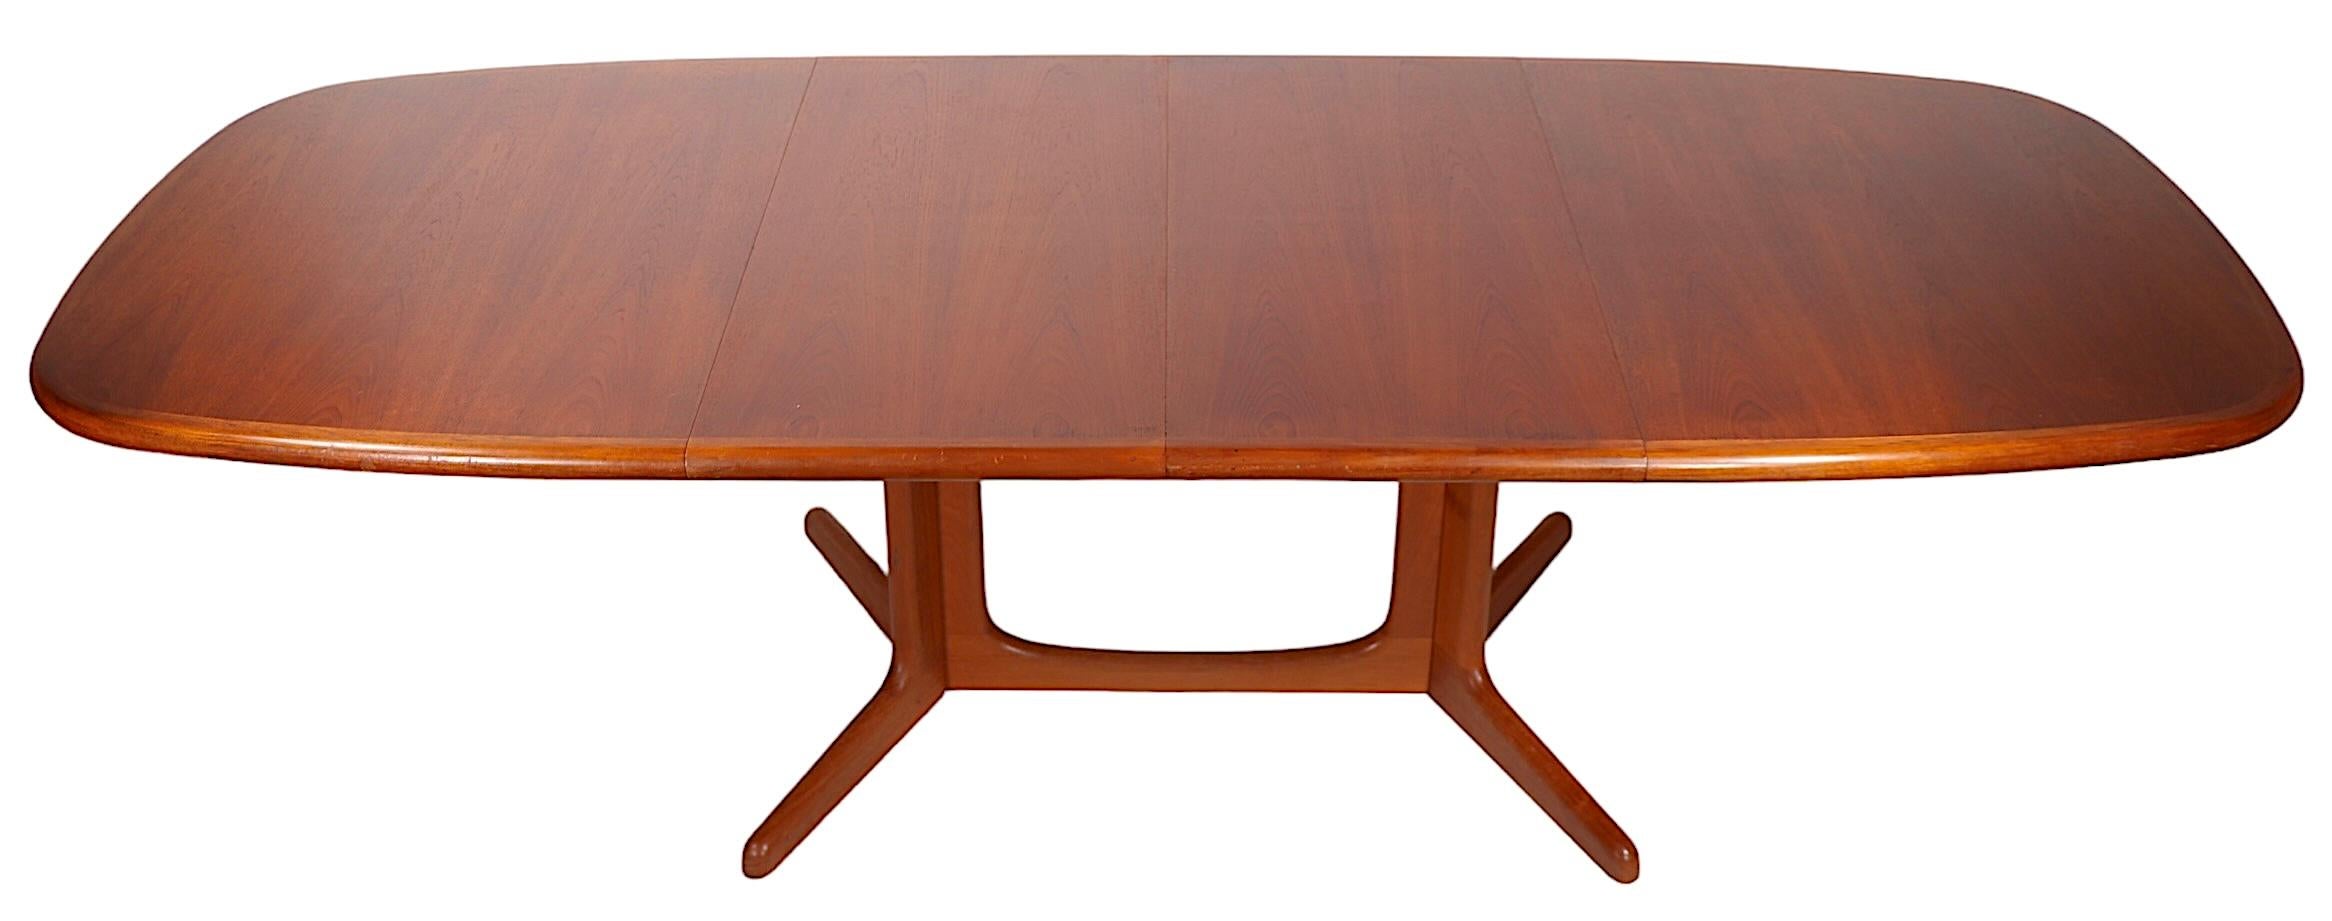 Danish Mid Century Oval Teak Dining Table by Niels Otto Moller for Gudme c 1970s For Sale 6